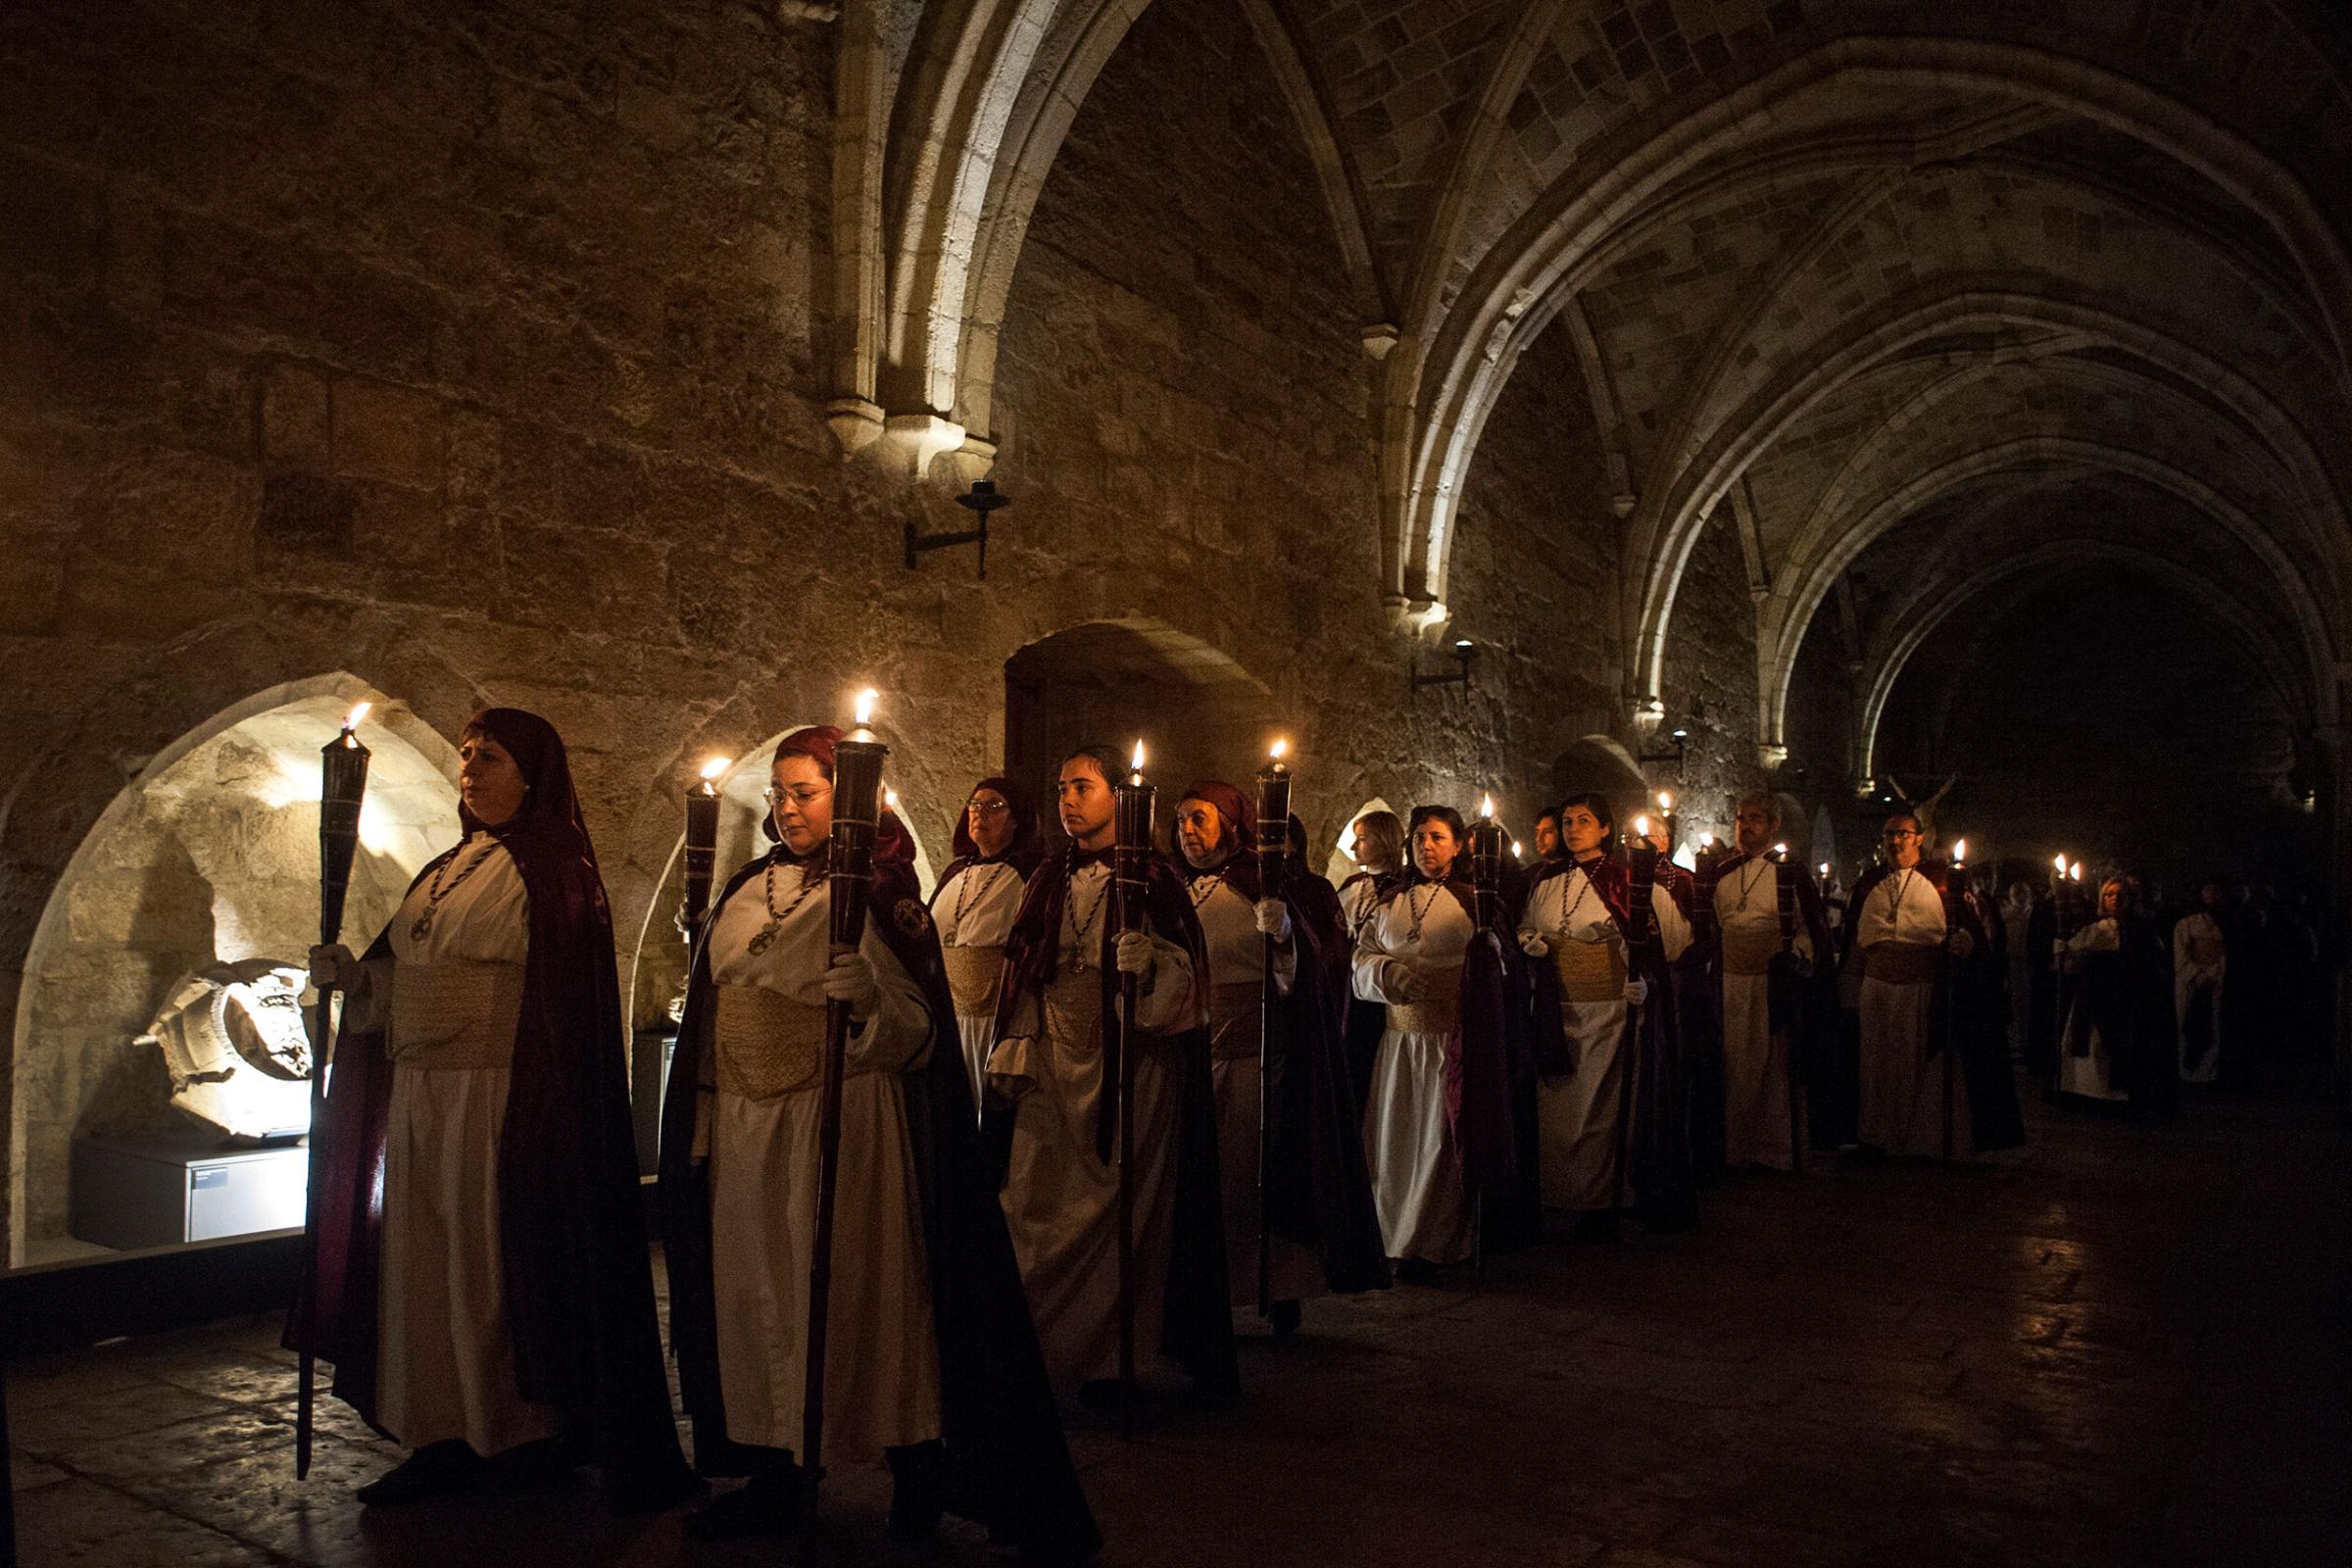 Participants in the procession of the Holy Christ of Peace celebrate on the night of Holy Thursday in Santander, Spain, March 24, 2016.